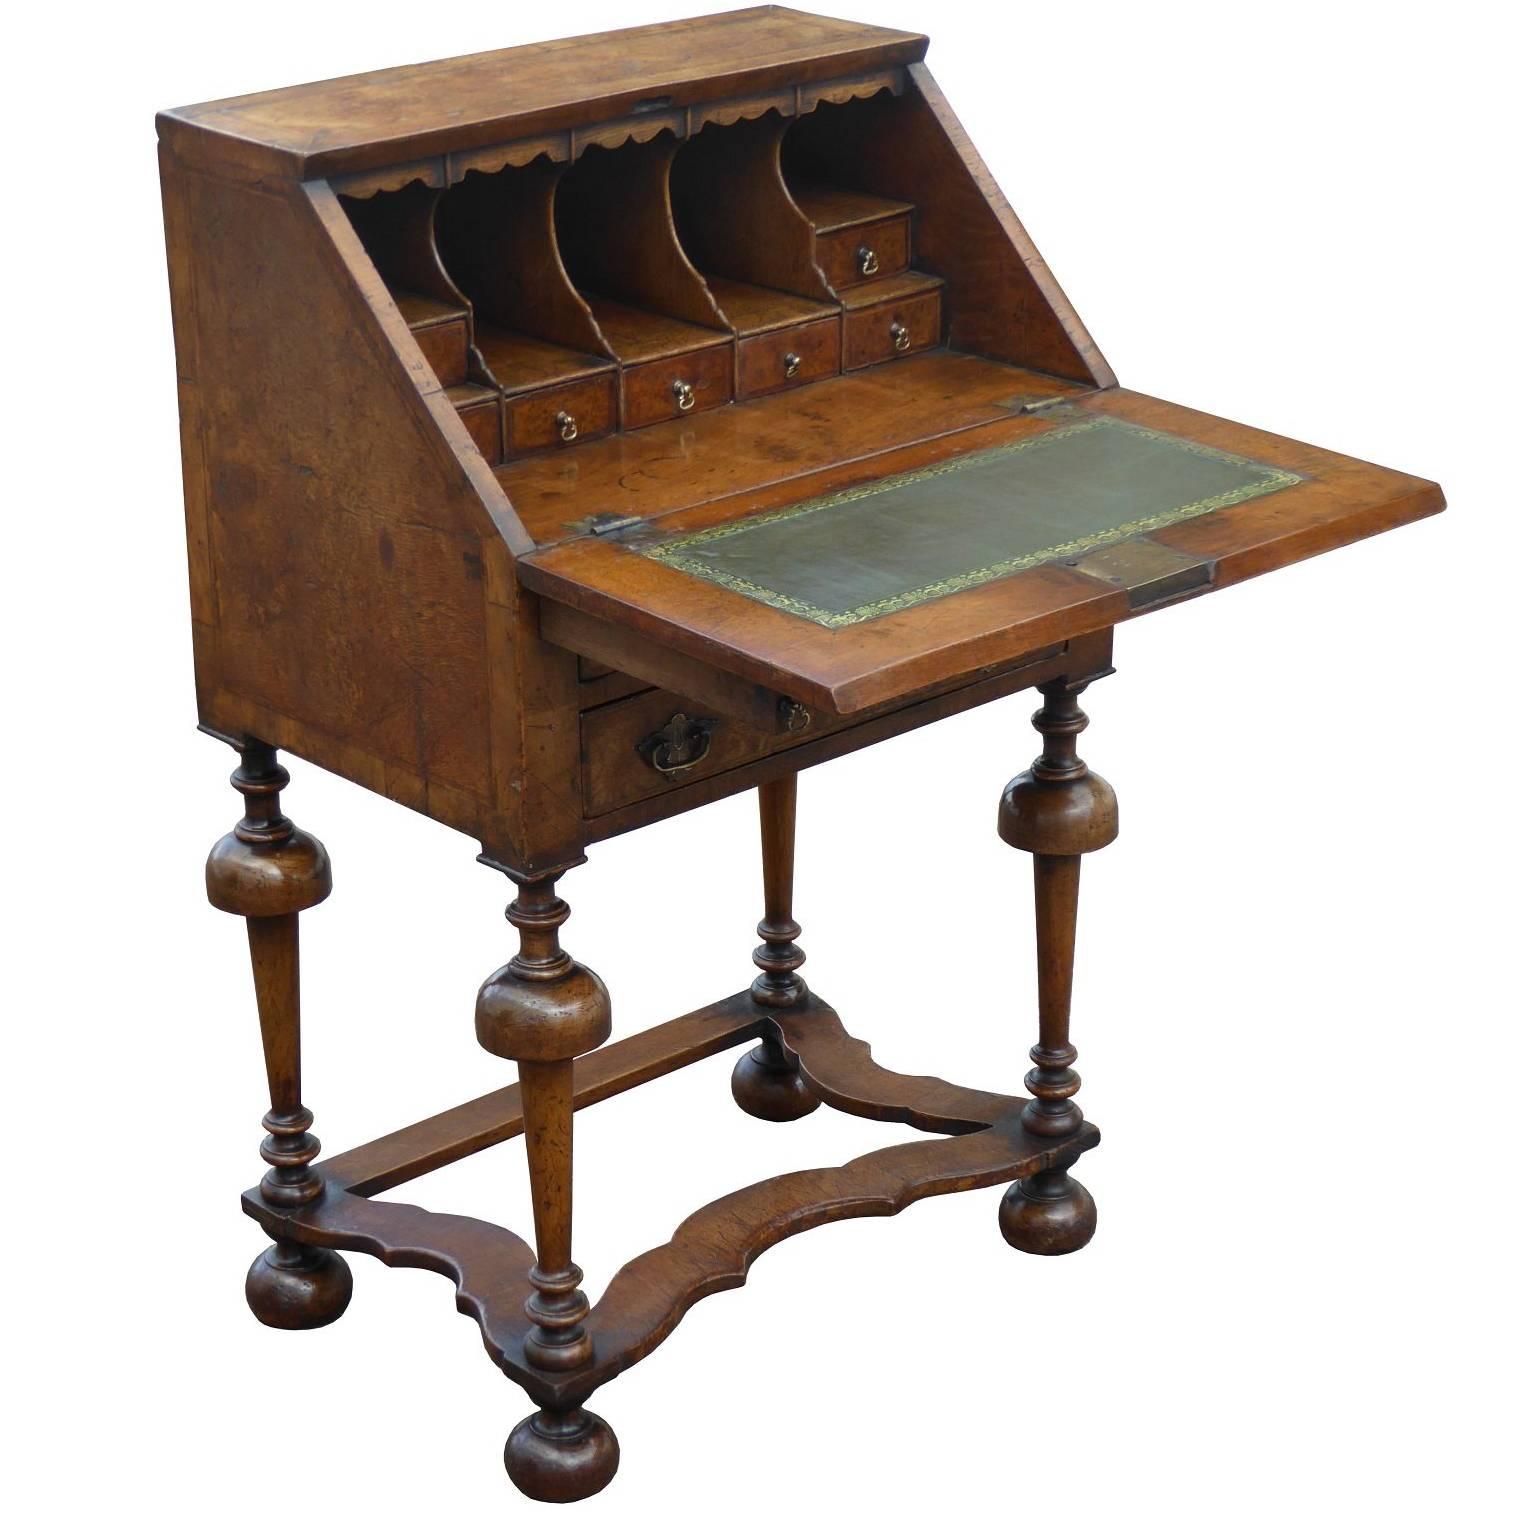 William and Mary Style Walnut Bureau of Small Proportions